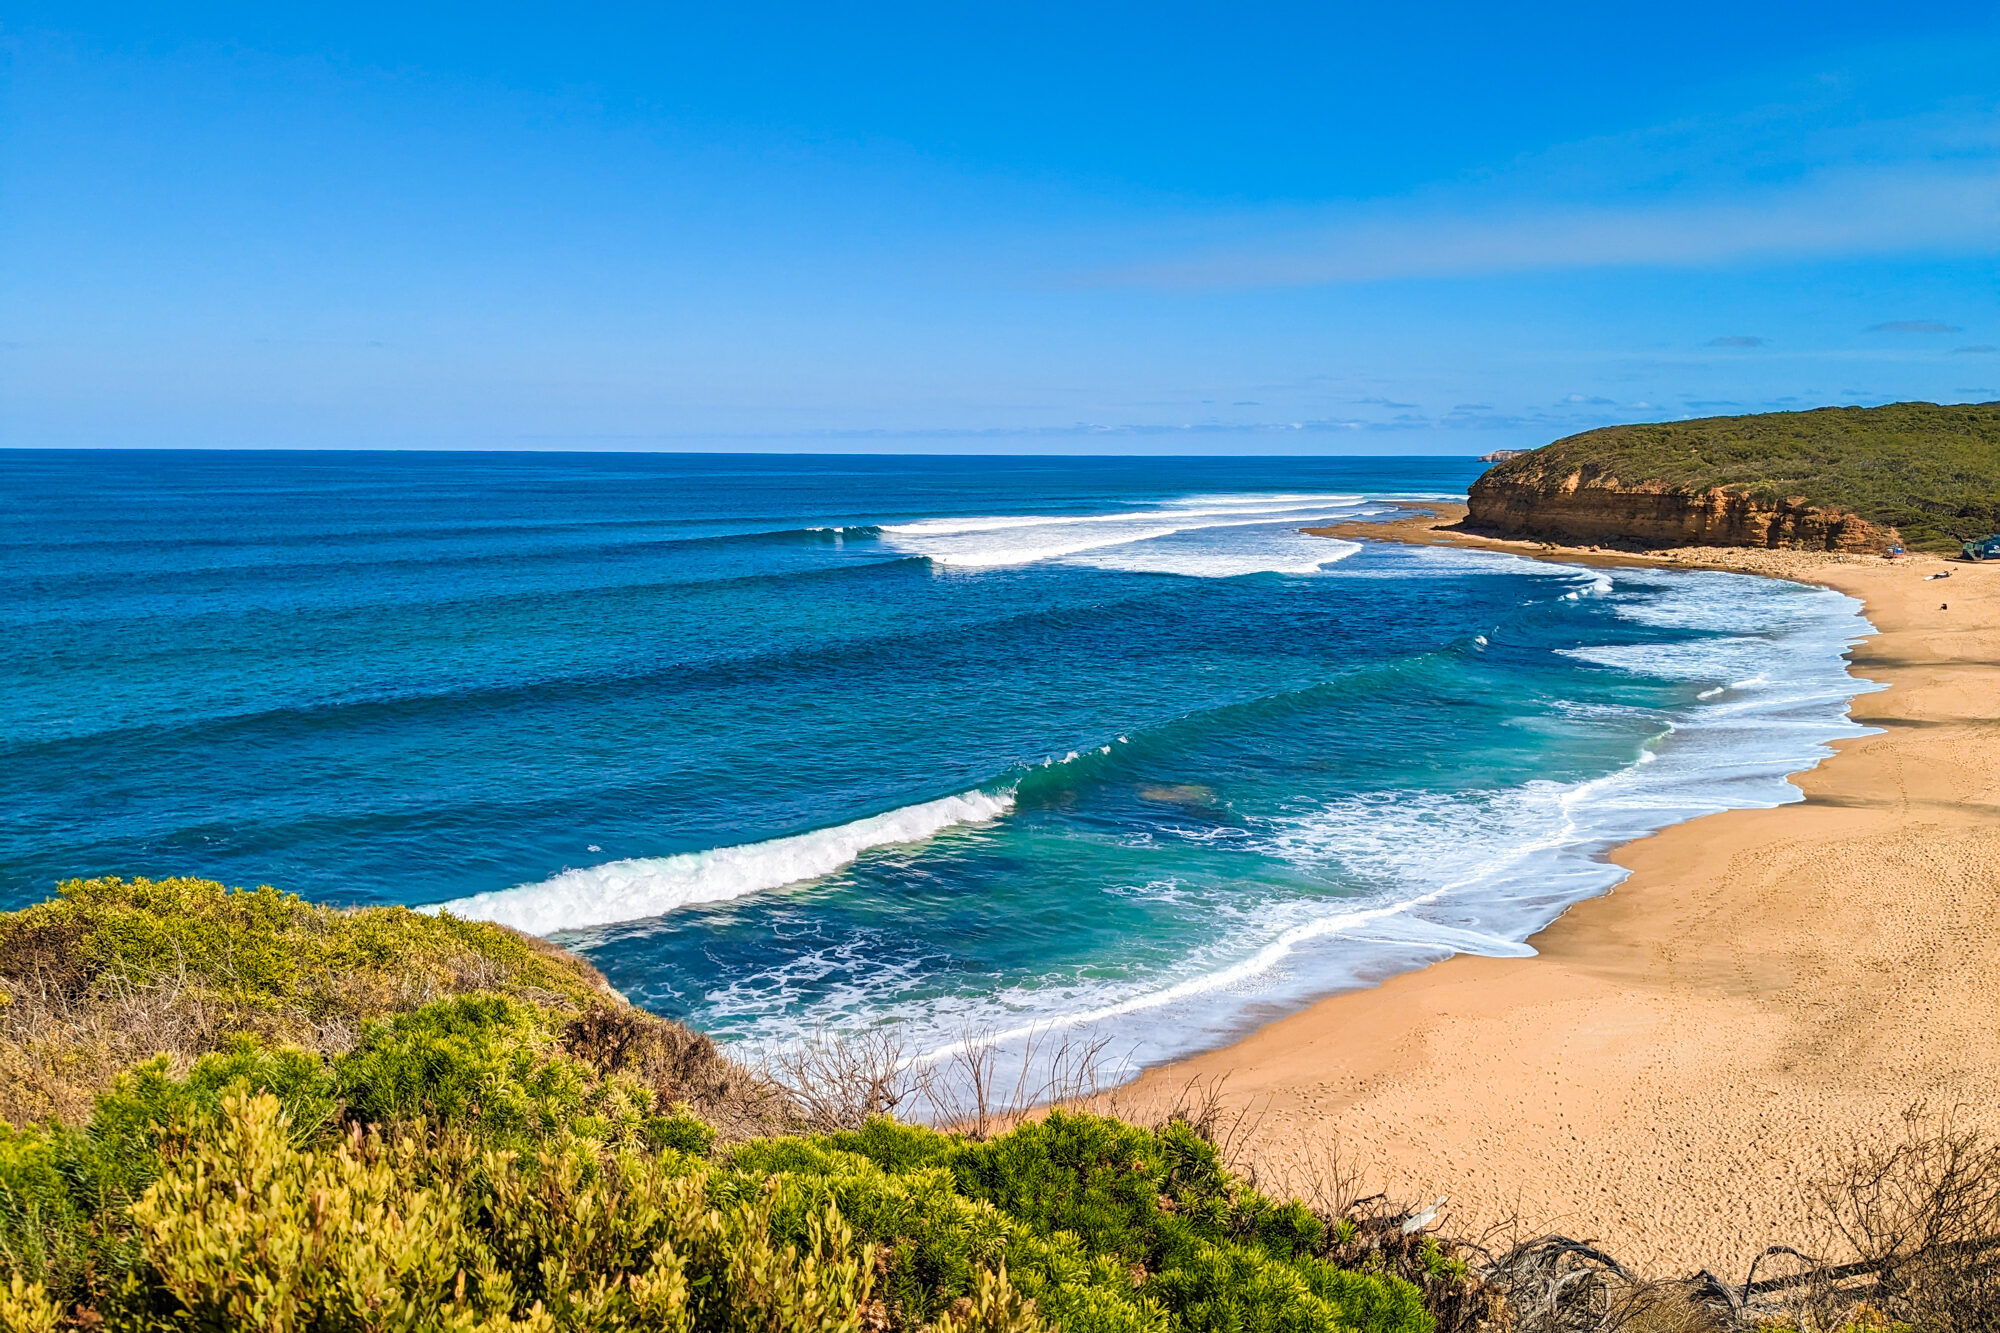 Bells Beach from the viewing platform on a cloudless, sunny day. The perfectly-formed waves are showcasing why this beach is popular with surfers, while the untouched sand indicates it's too windy for sunbathing